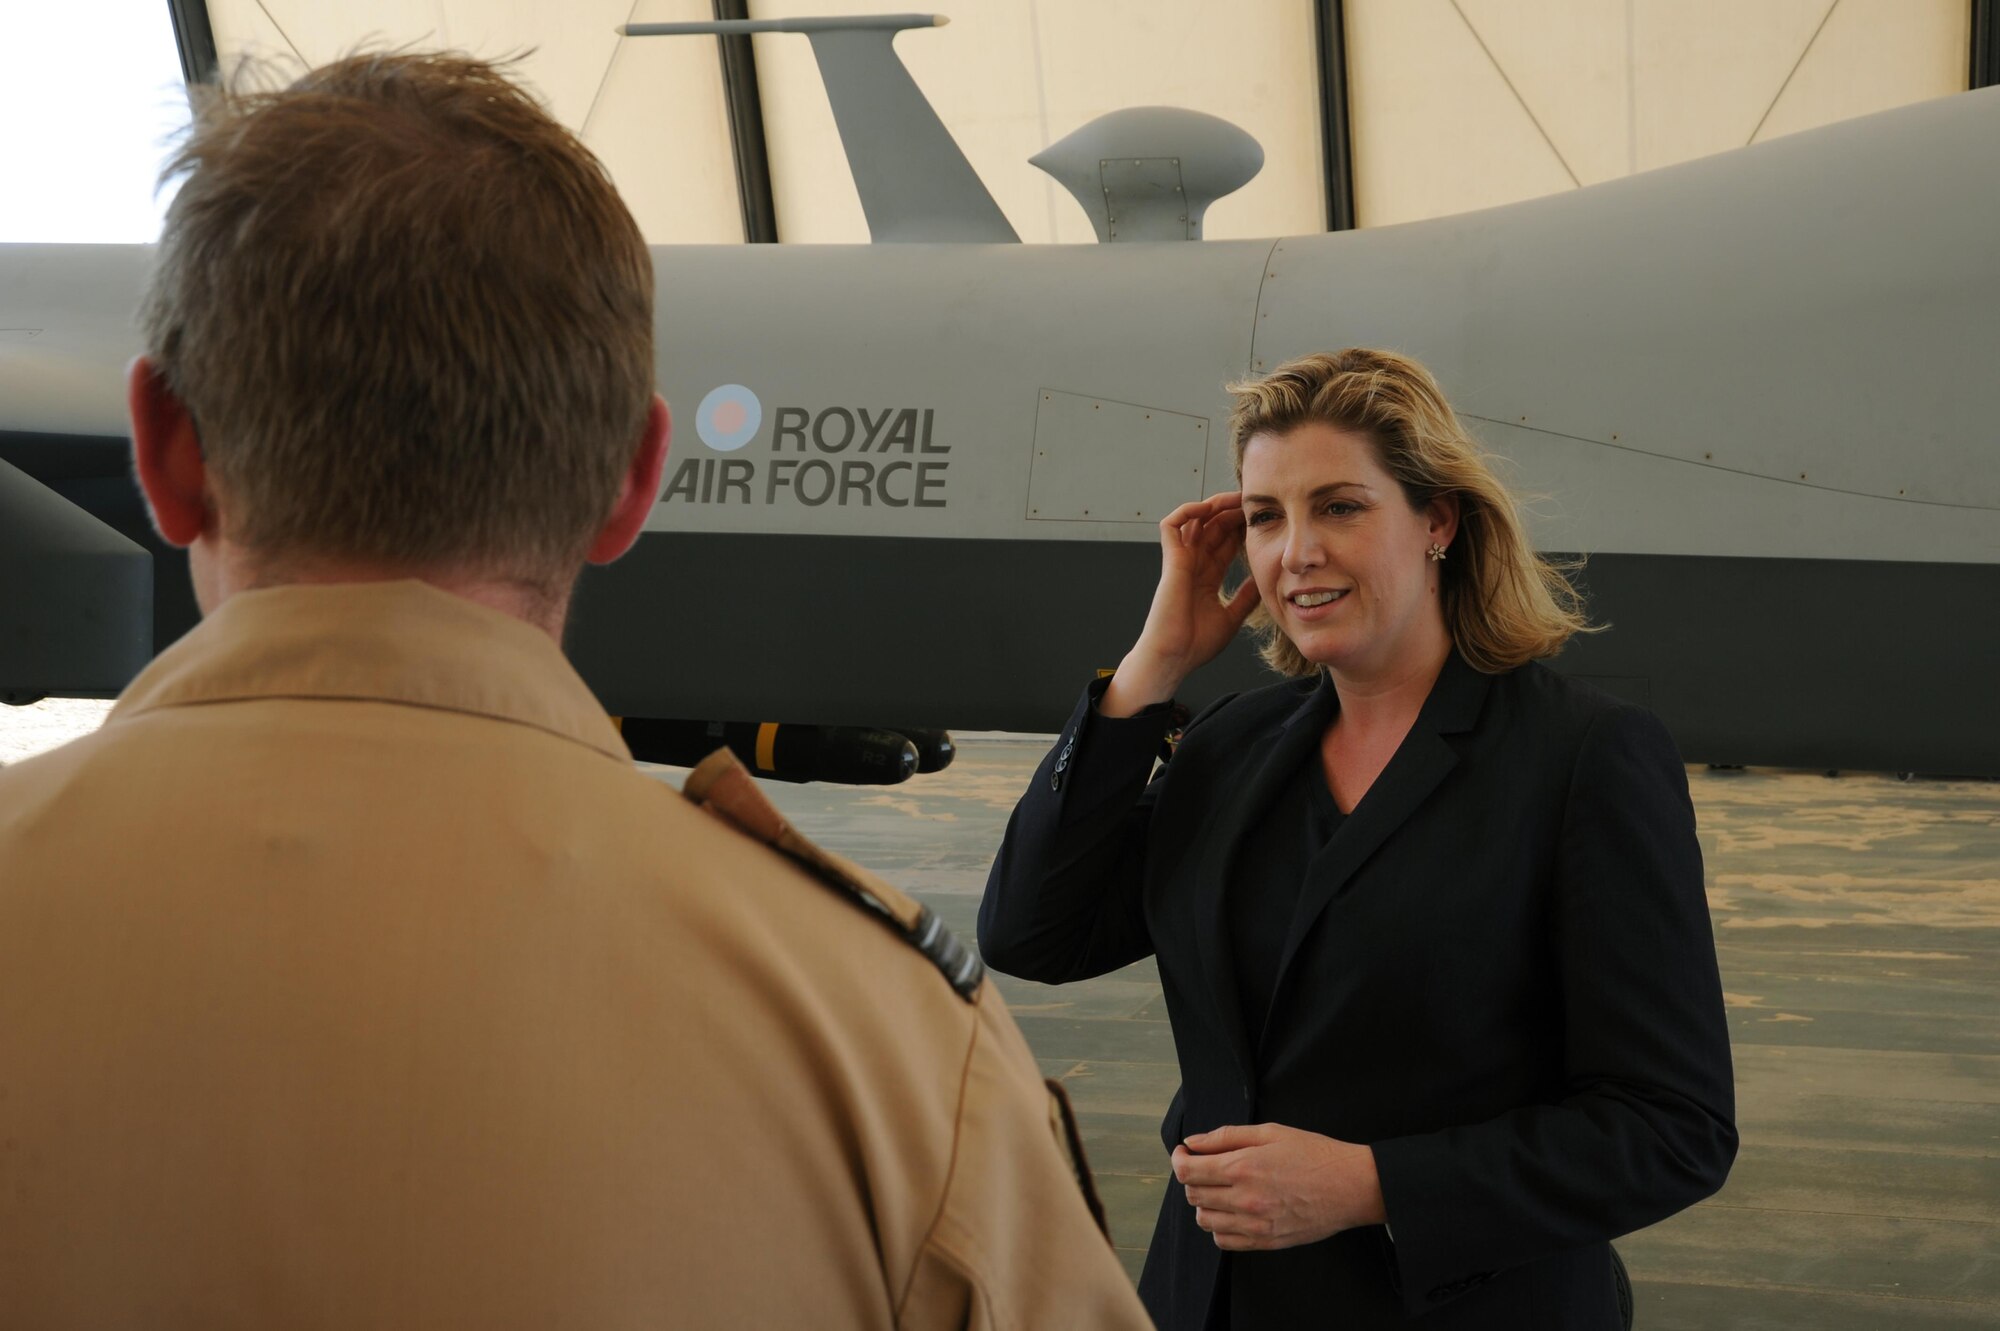 Penny Mordaunt, the U.K Minister of State for the Armed Forces, visits with a member of the U.K. detachment and its MQ-9 Reapers at an undisclosed location in Southwest Asia, June 2, 2016. The visit provided Mordaunt an opportunity to tour various assets in the region and better understand the U.K. military’s working conditions. (U.S. Air Force photo by Senior Airman Zachary Kee)